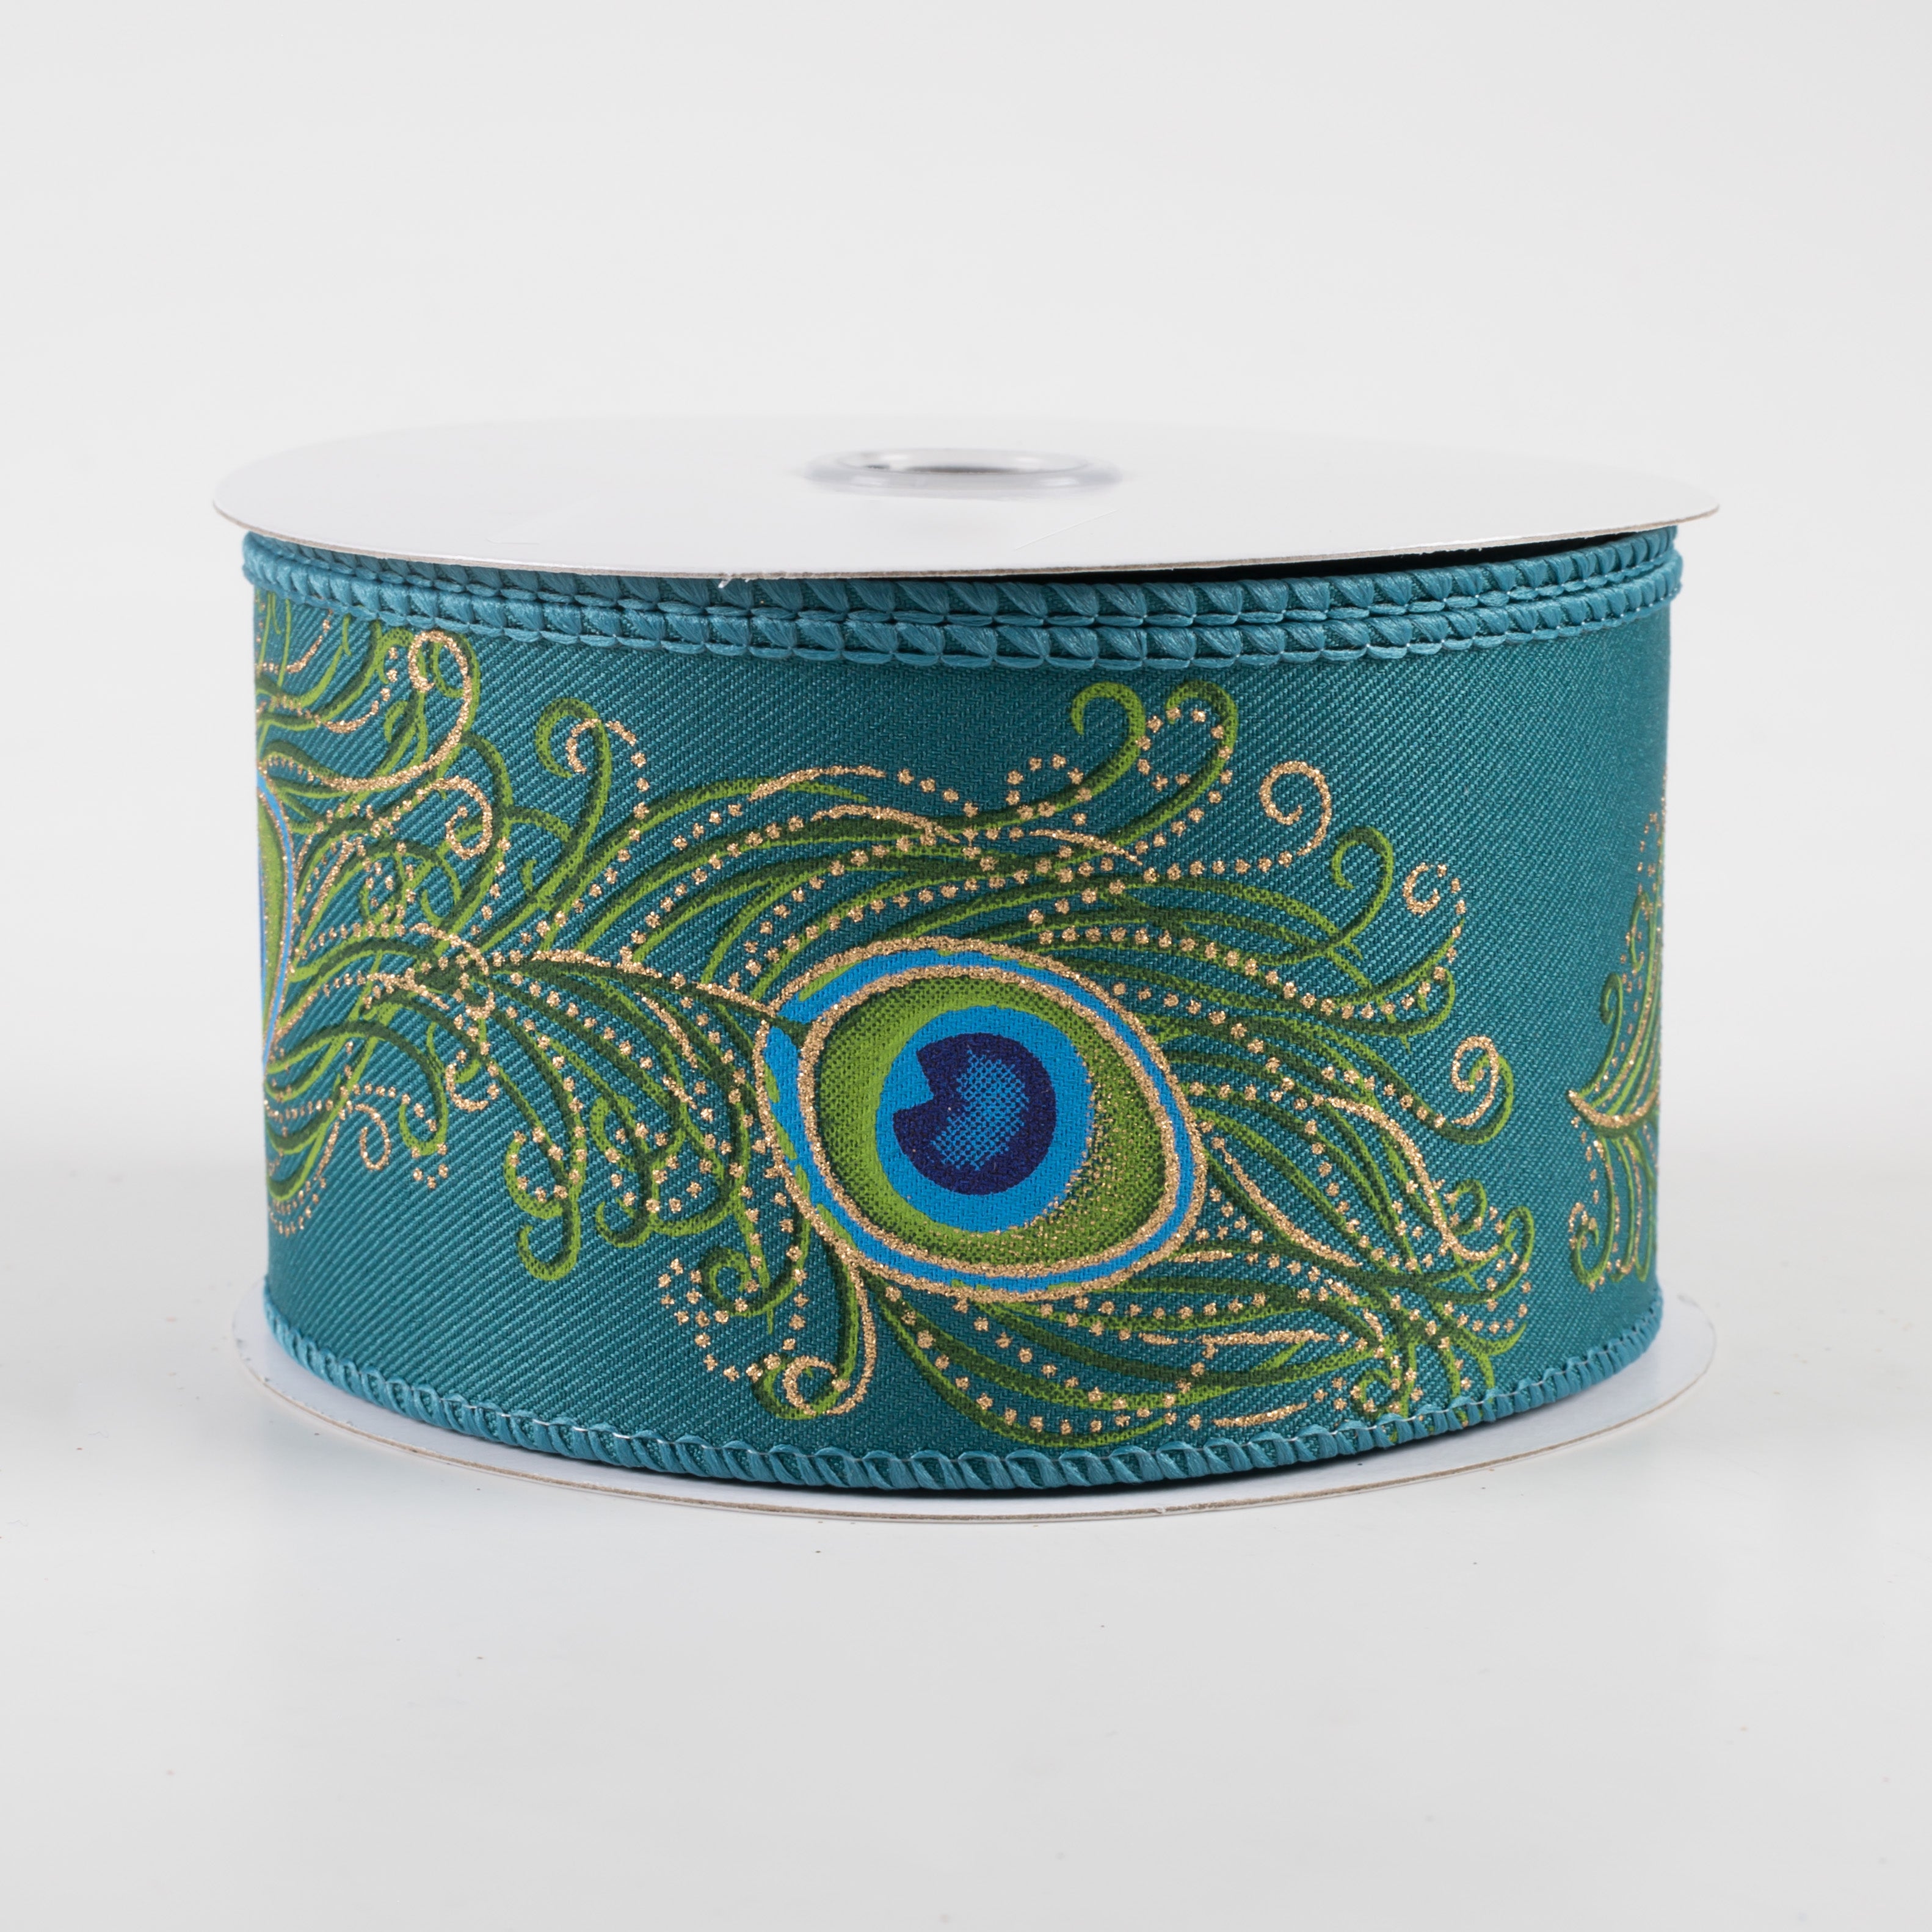 2.5" Peacock Feather Ribbon: Dark Teal, Green, Blue, Gold (10 Yards)